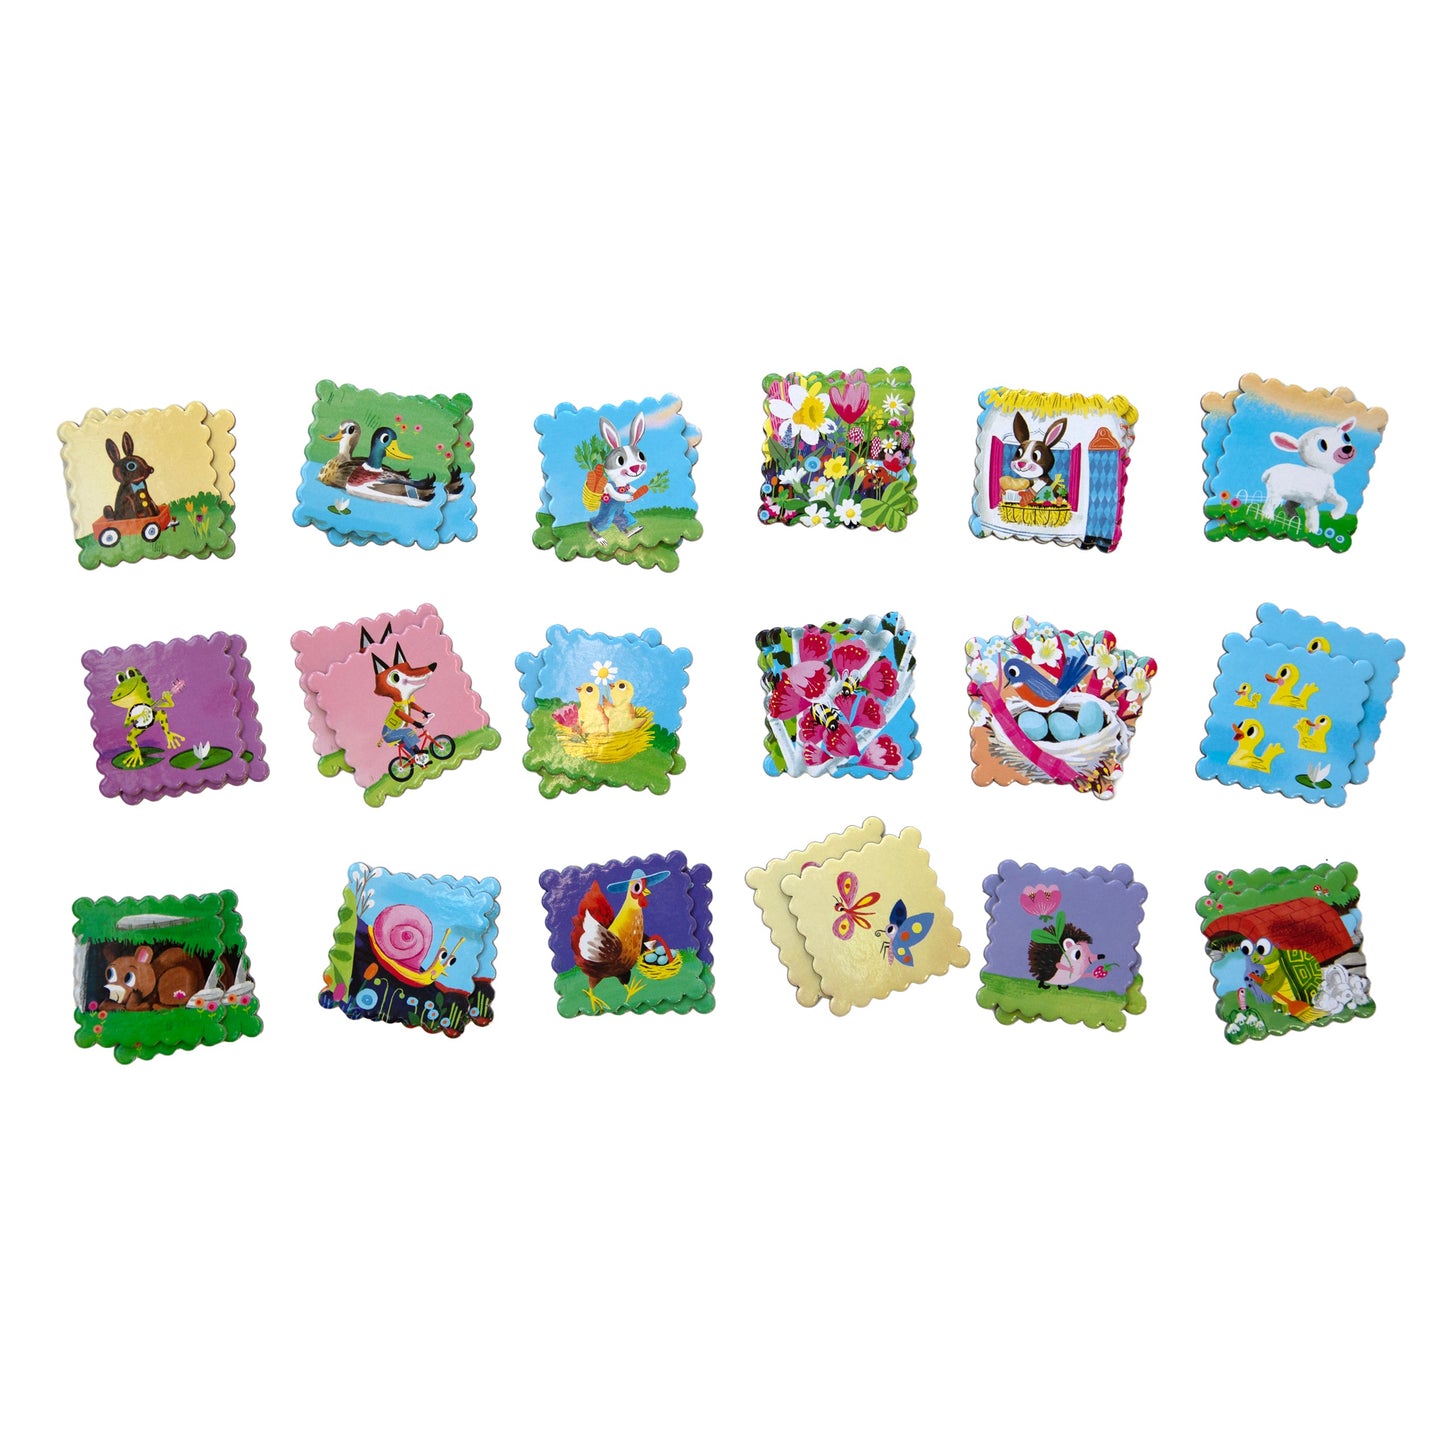 Spring Little Square Memory Game eeBoo Unique Gifts for Kids Ages 3+